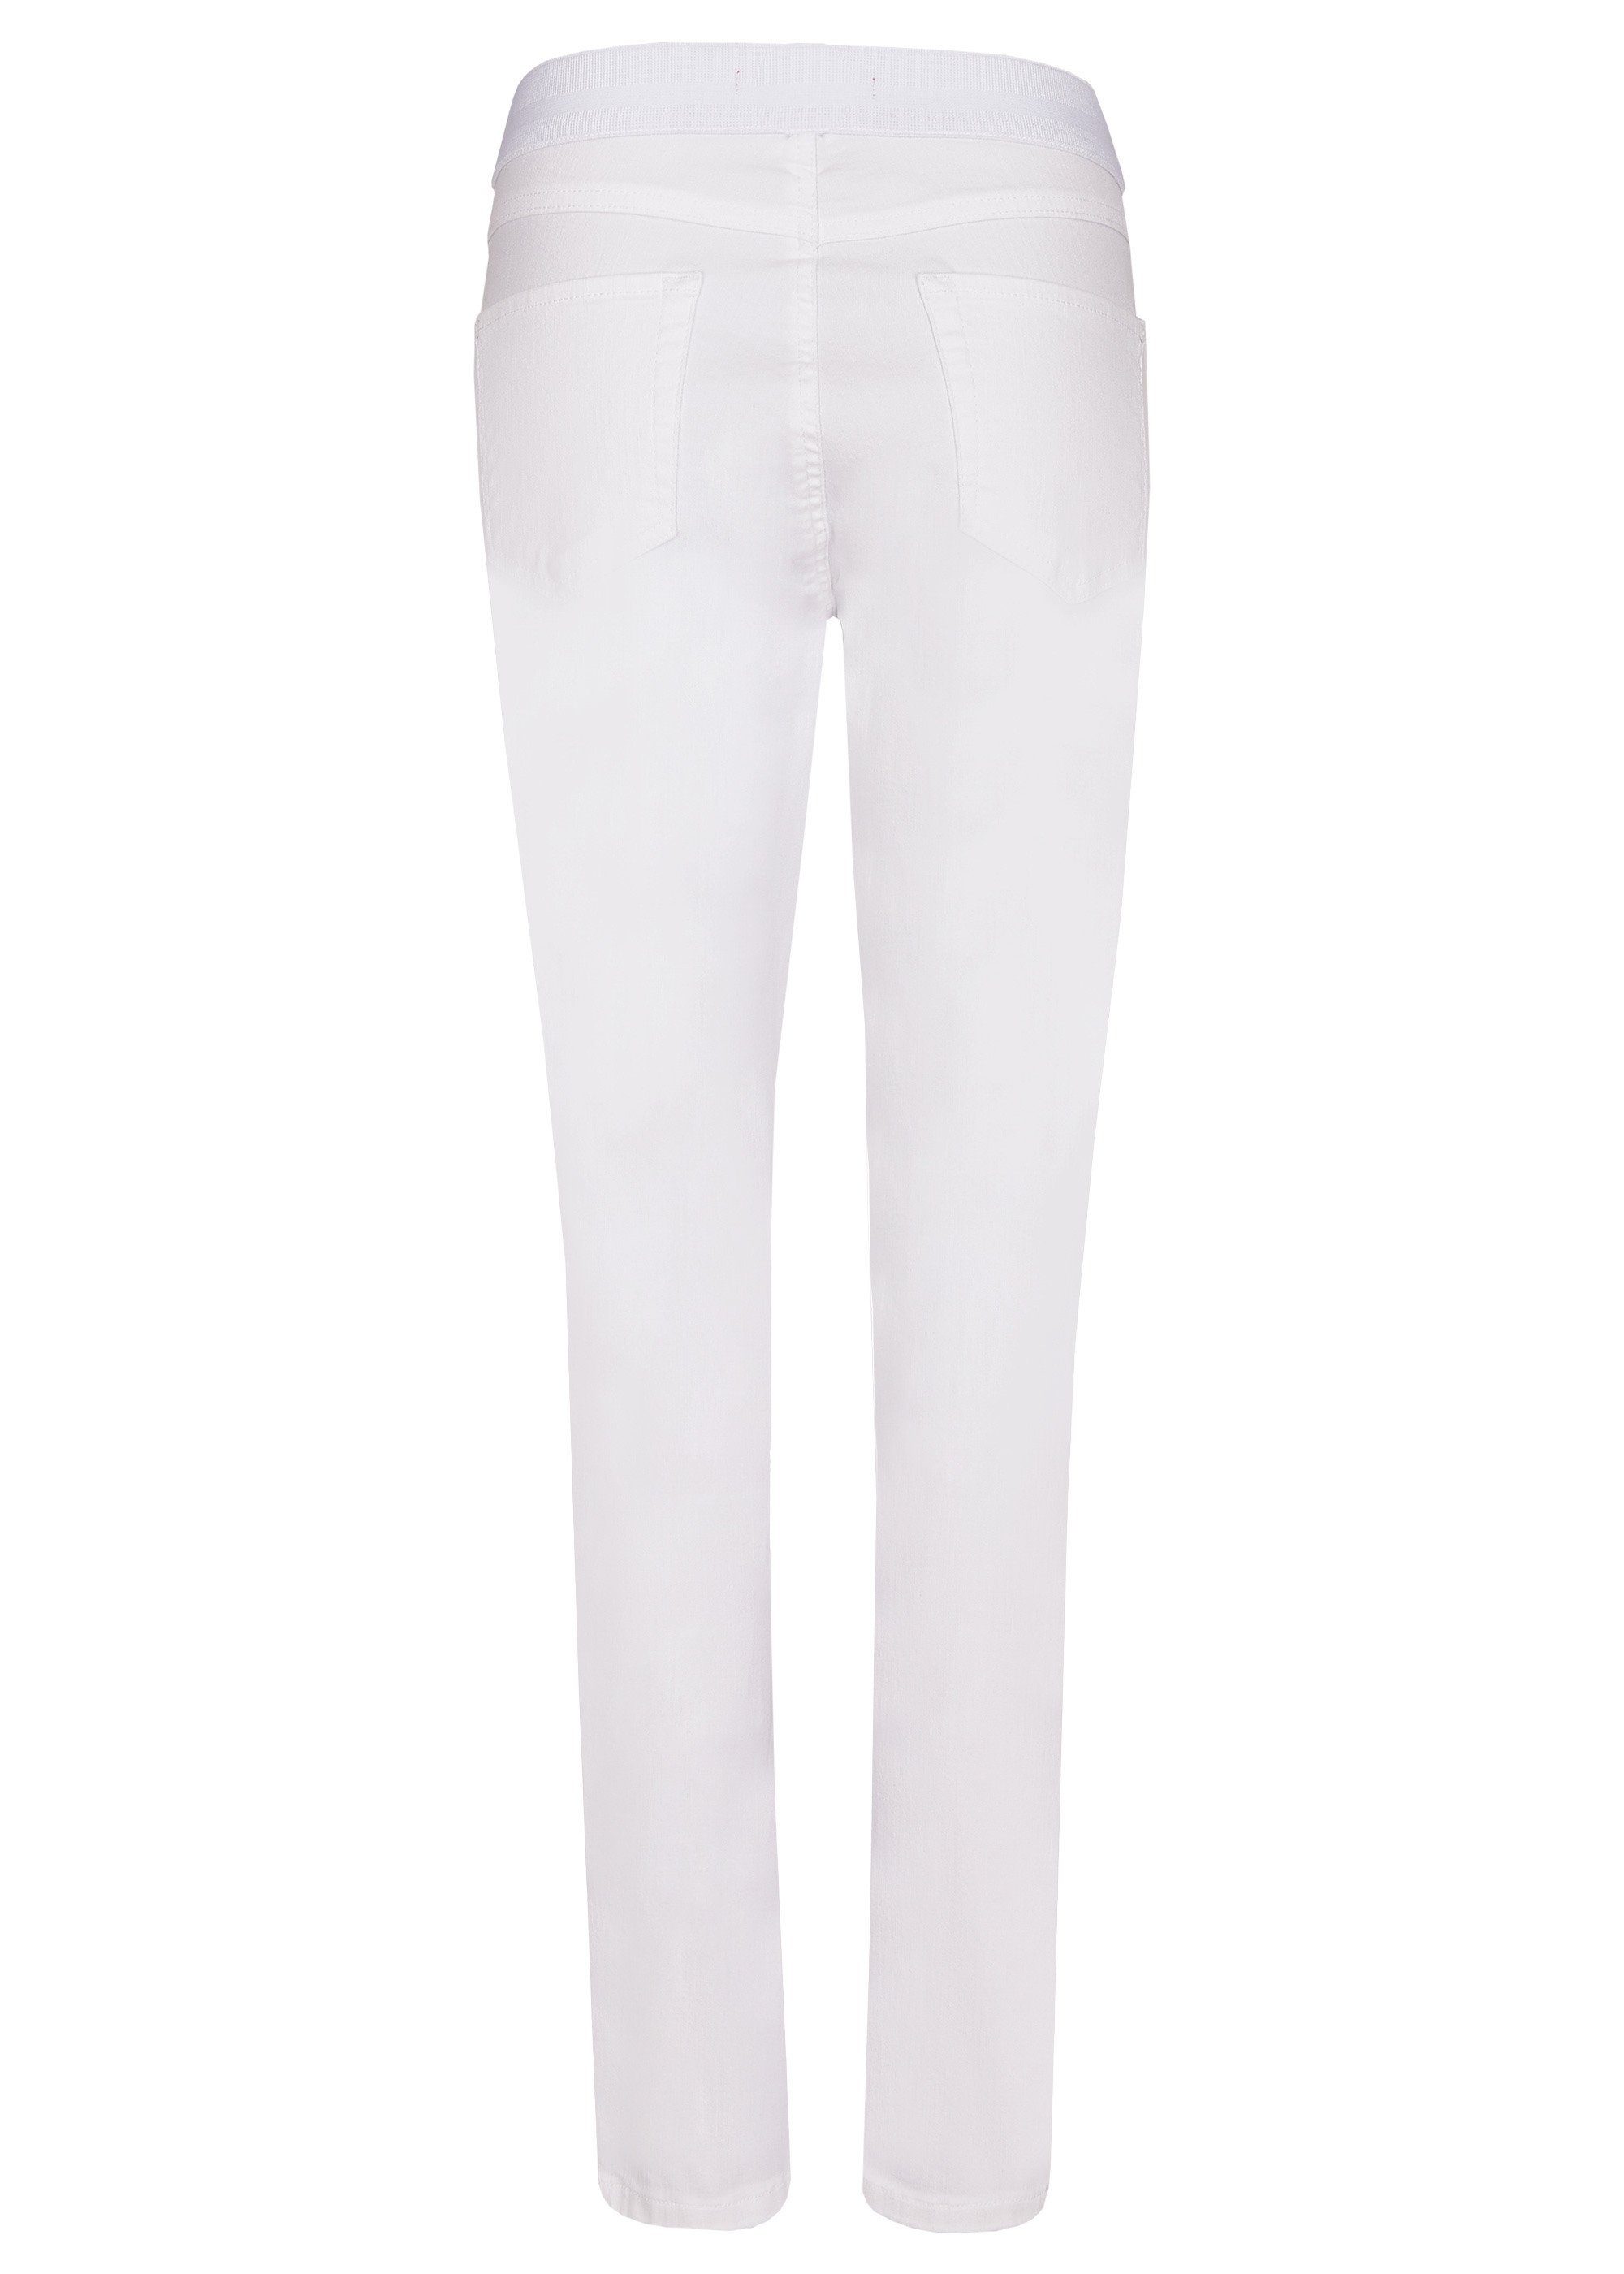 ANGELS Stretch-Jeans ANGELS JEANS ONE SIZE white 399